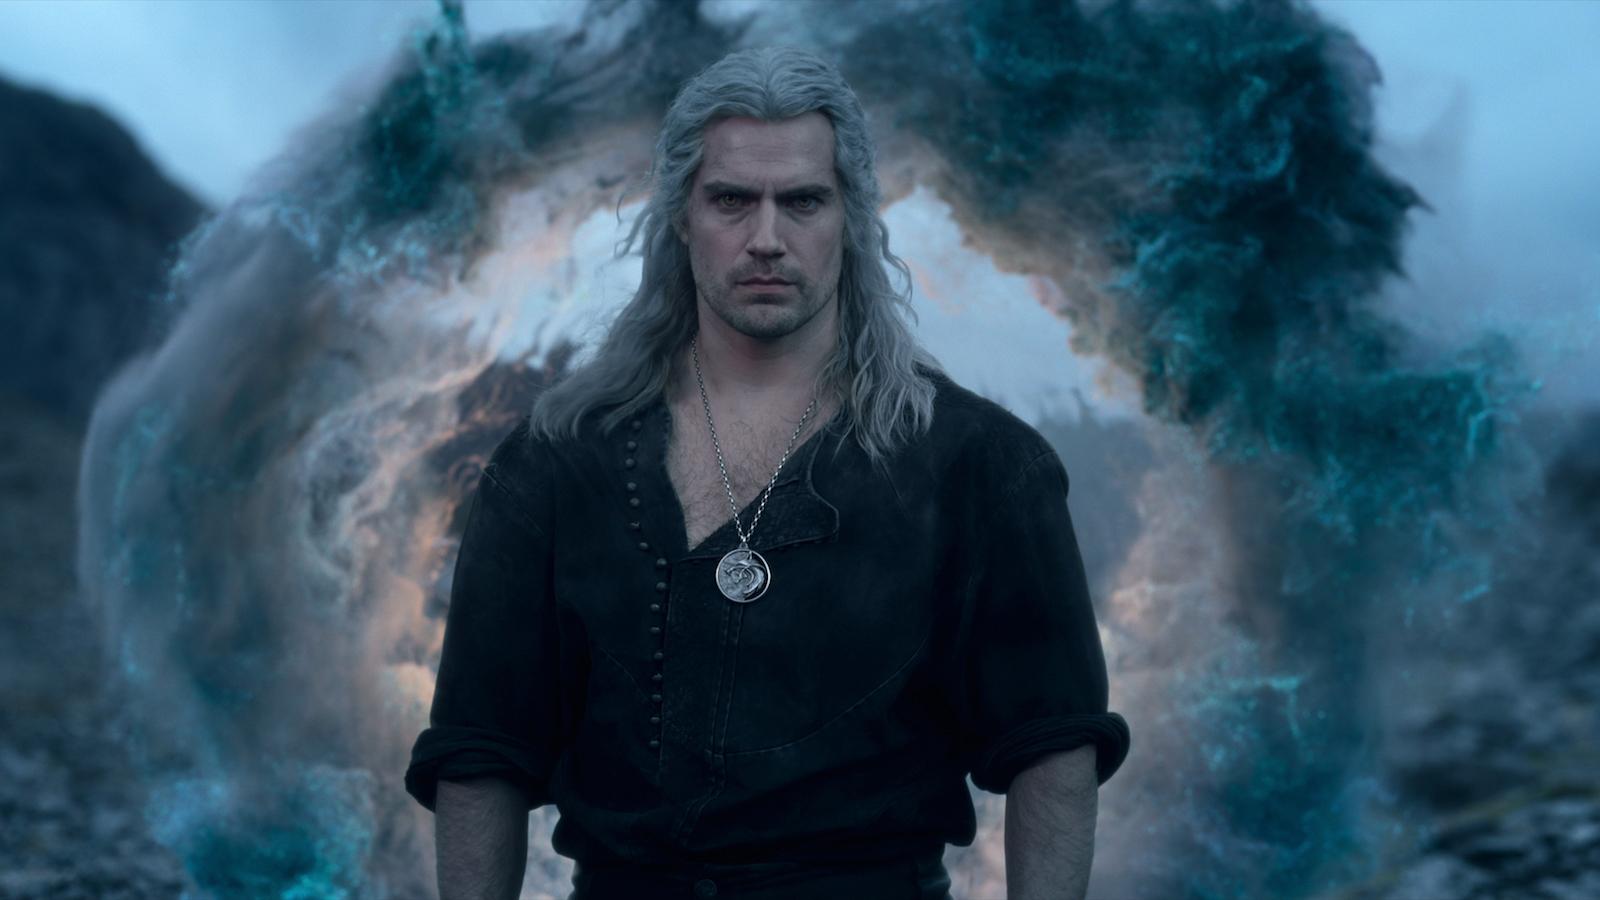 The Witcher' Season 3: Release Date, Cast, Trailer, and More